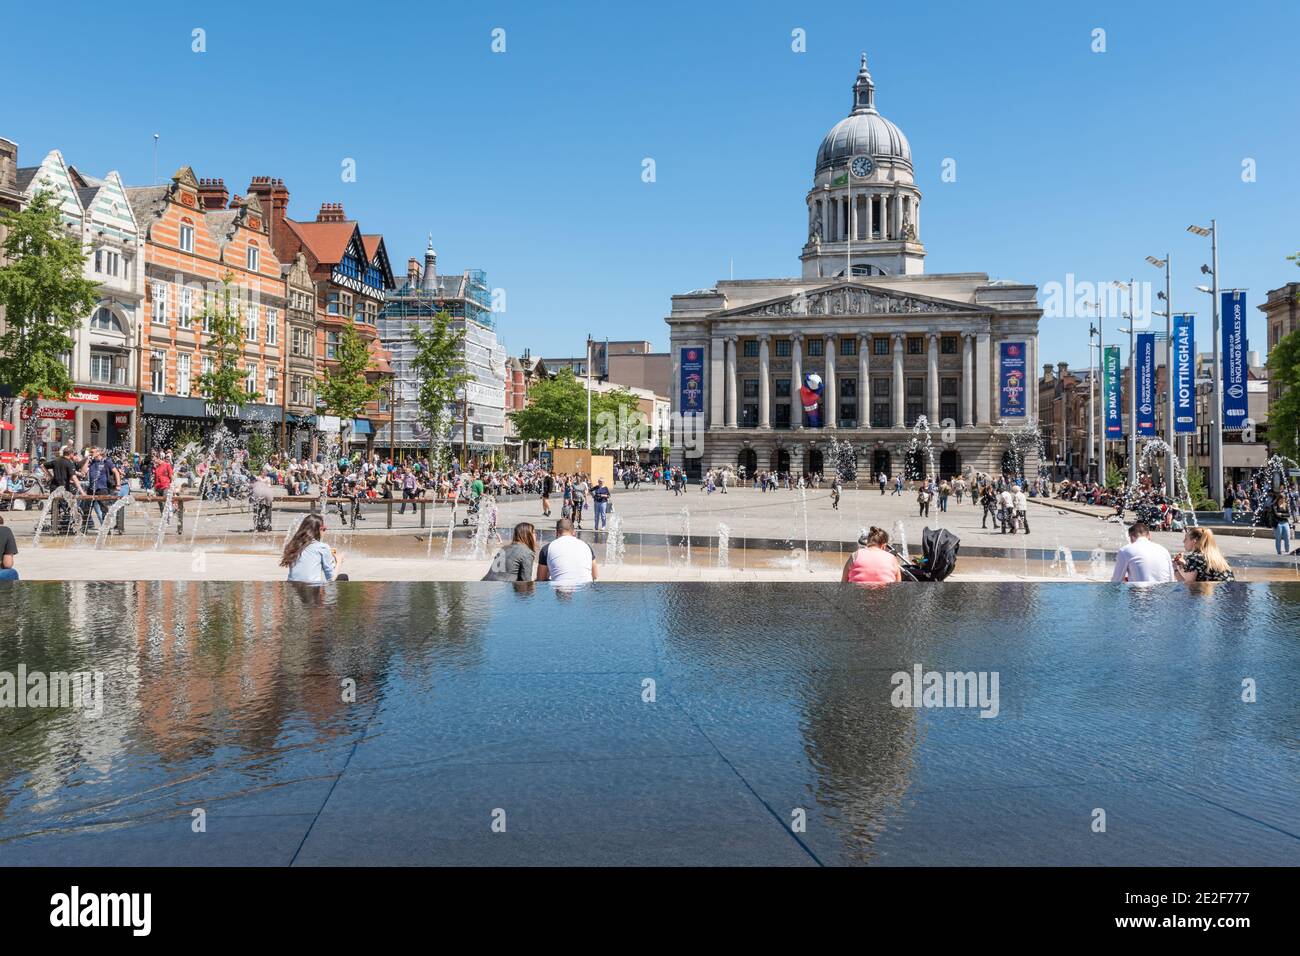 The imposing Nottingham Council House stands high above Nottingham's city centre acting as a backdrop to Nottingham's Old Market Square. Stock Photo